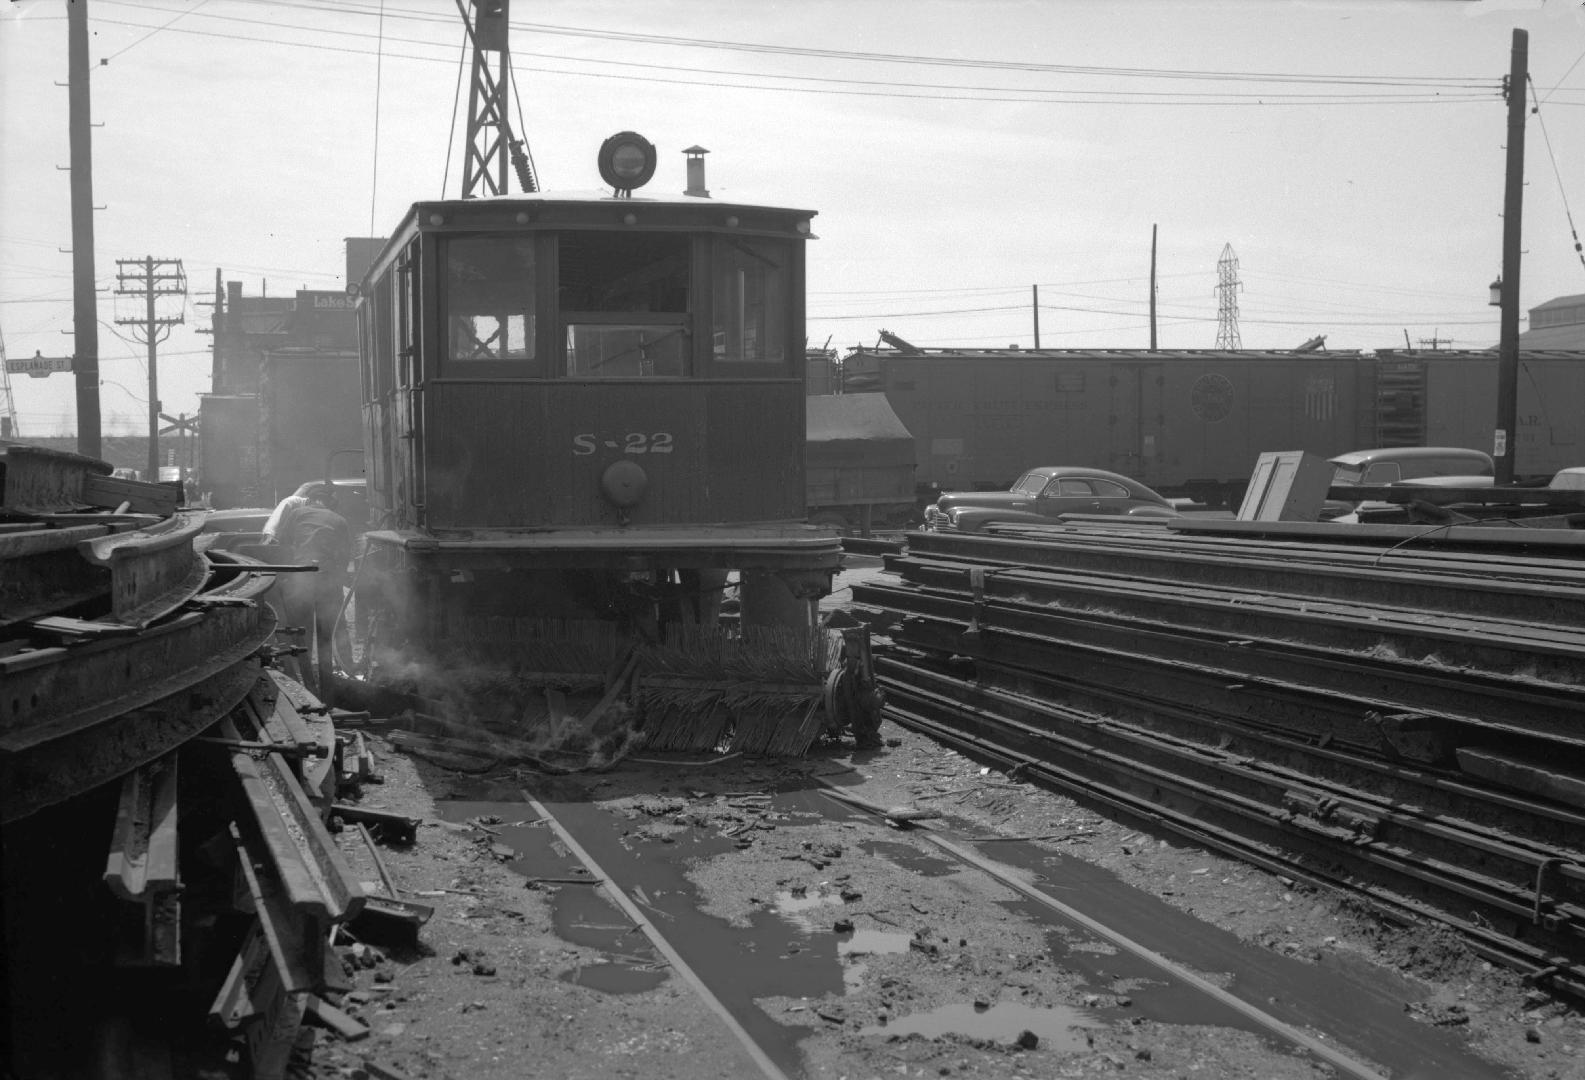 T.T.C., #S-22, sweeper, being scrapped at George St. yard, looking south across Esplanade E